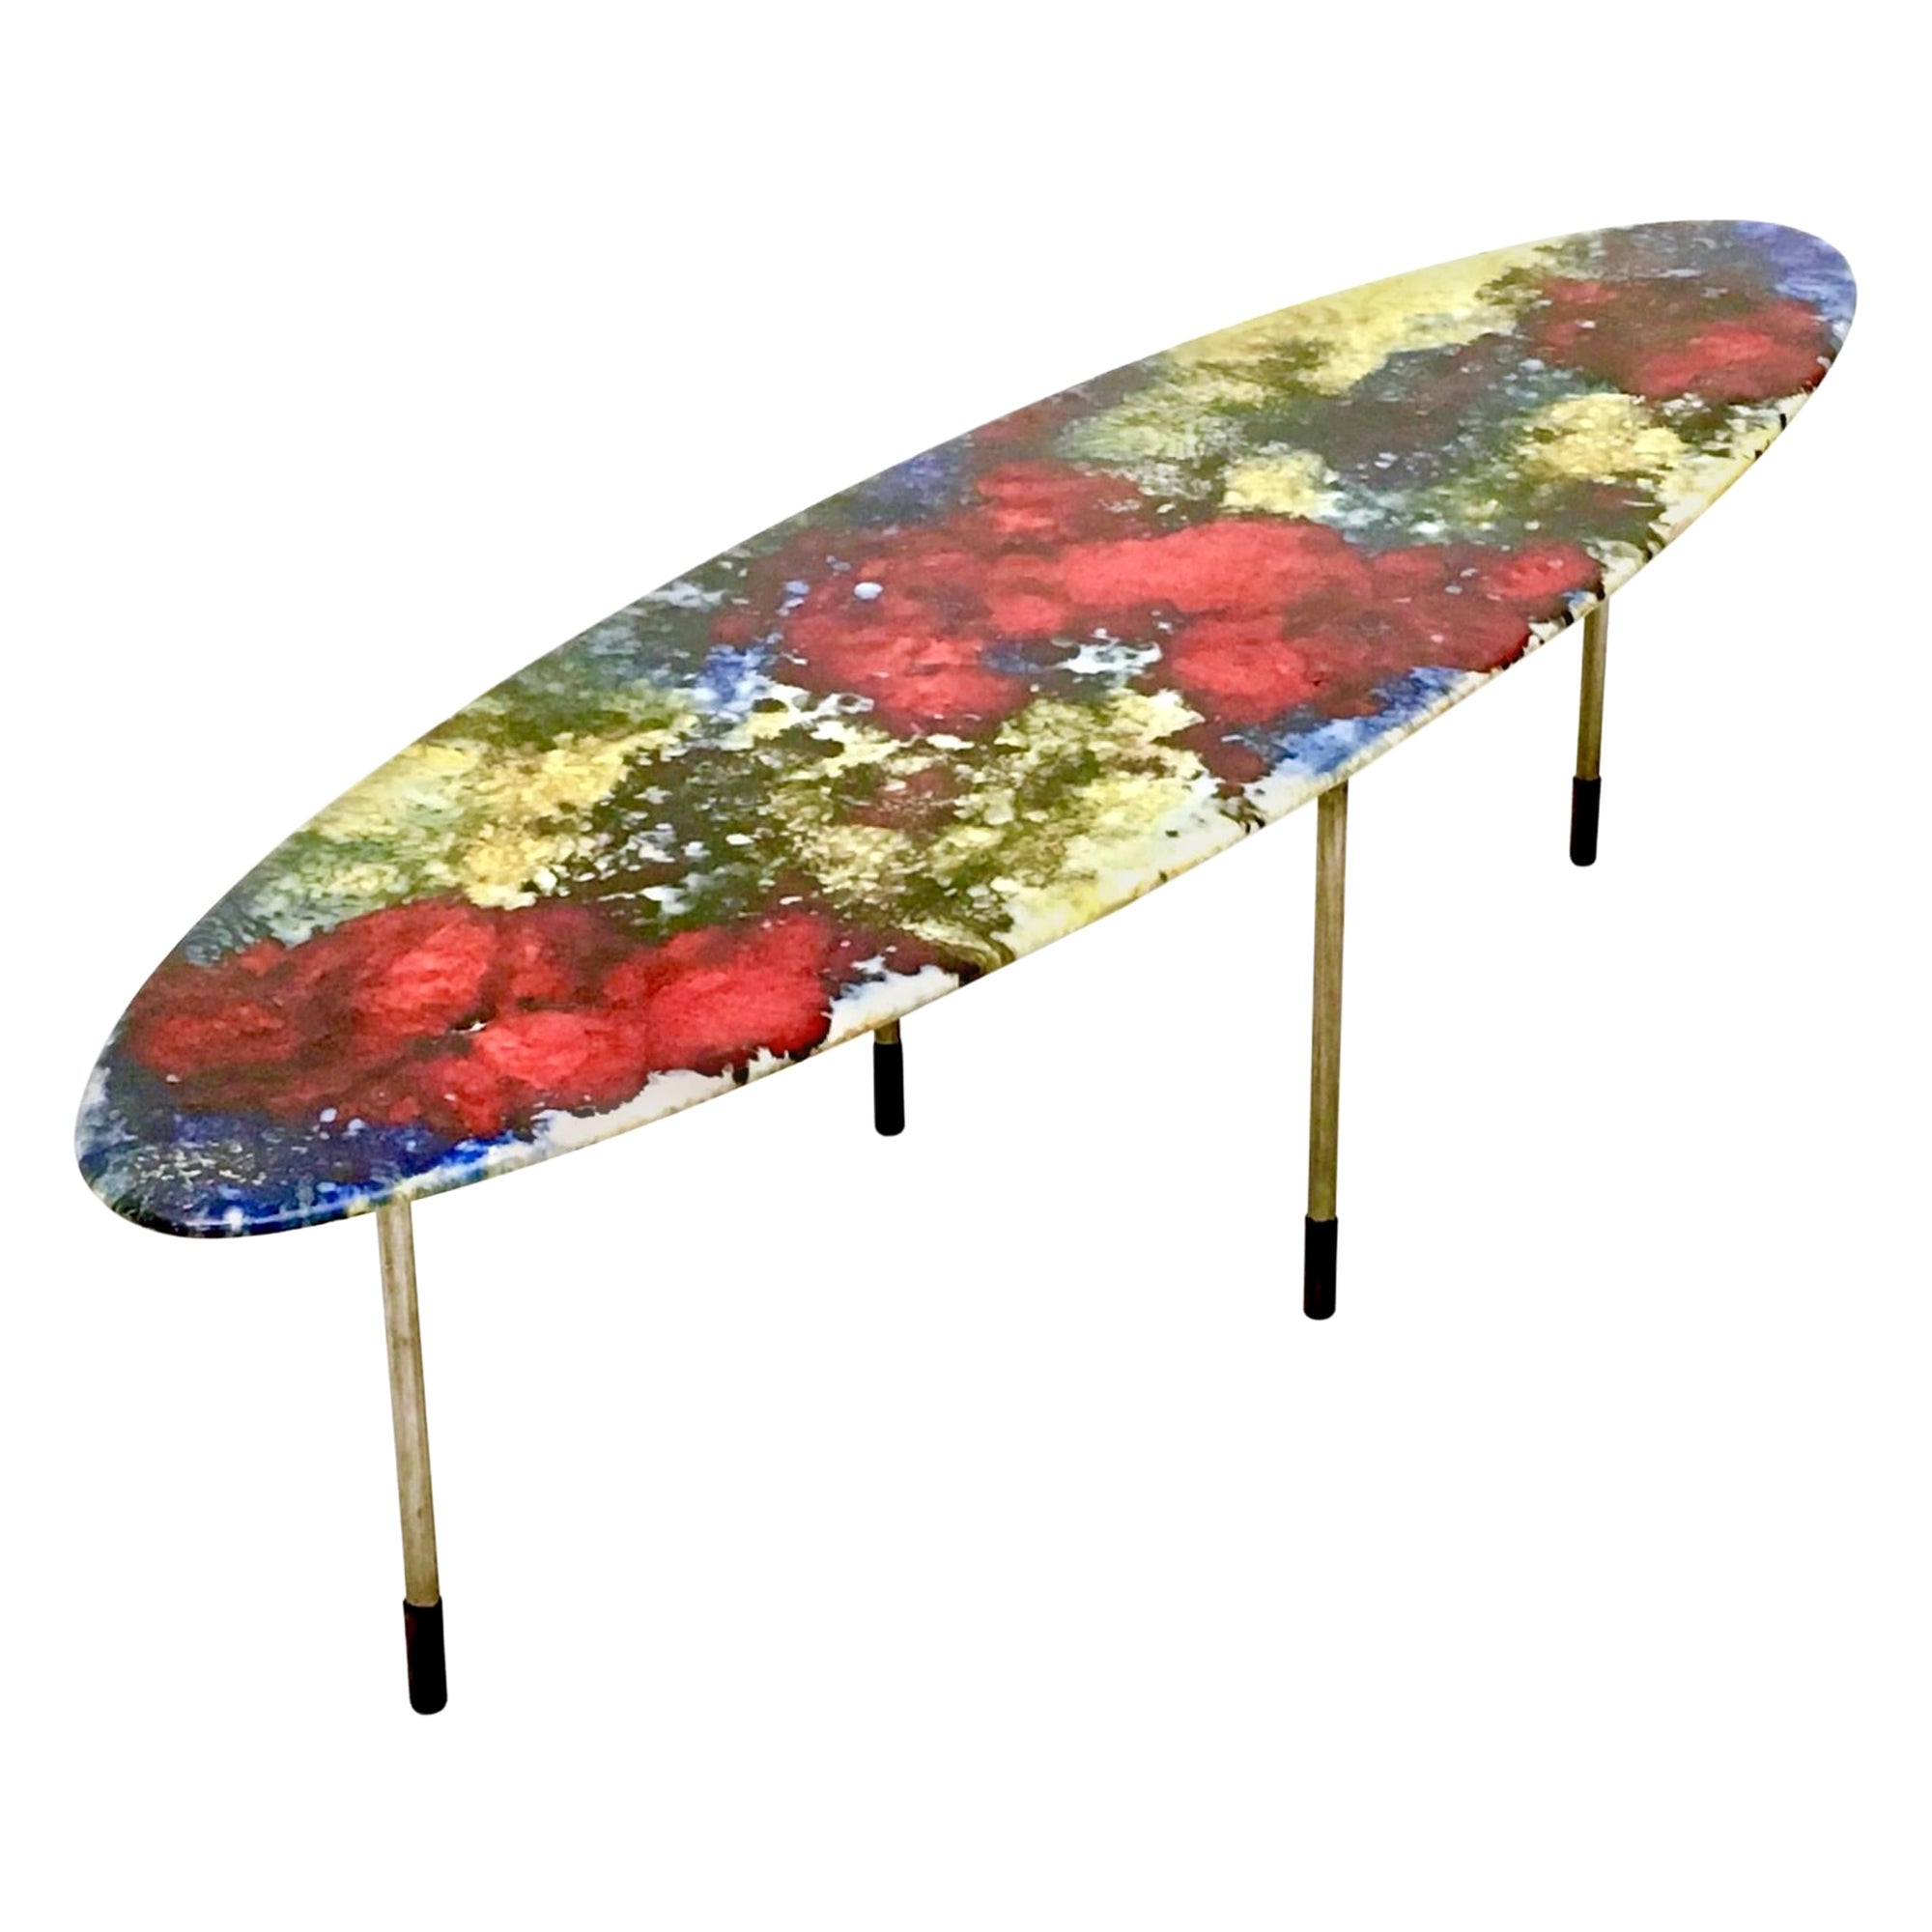 Vintage Oval Coffee Table by Stil Keramos with a Colored Lacquered Ceramic Top